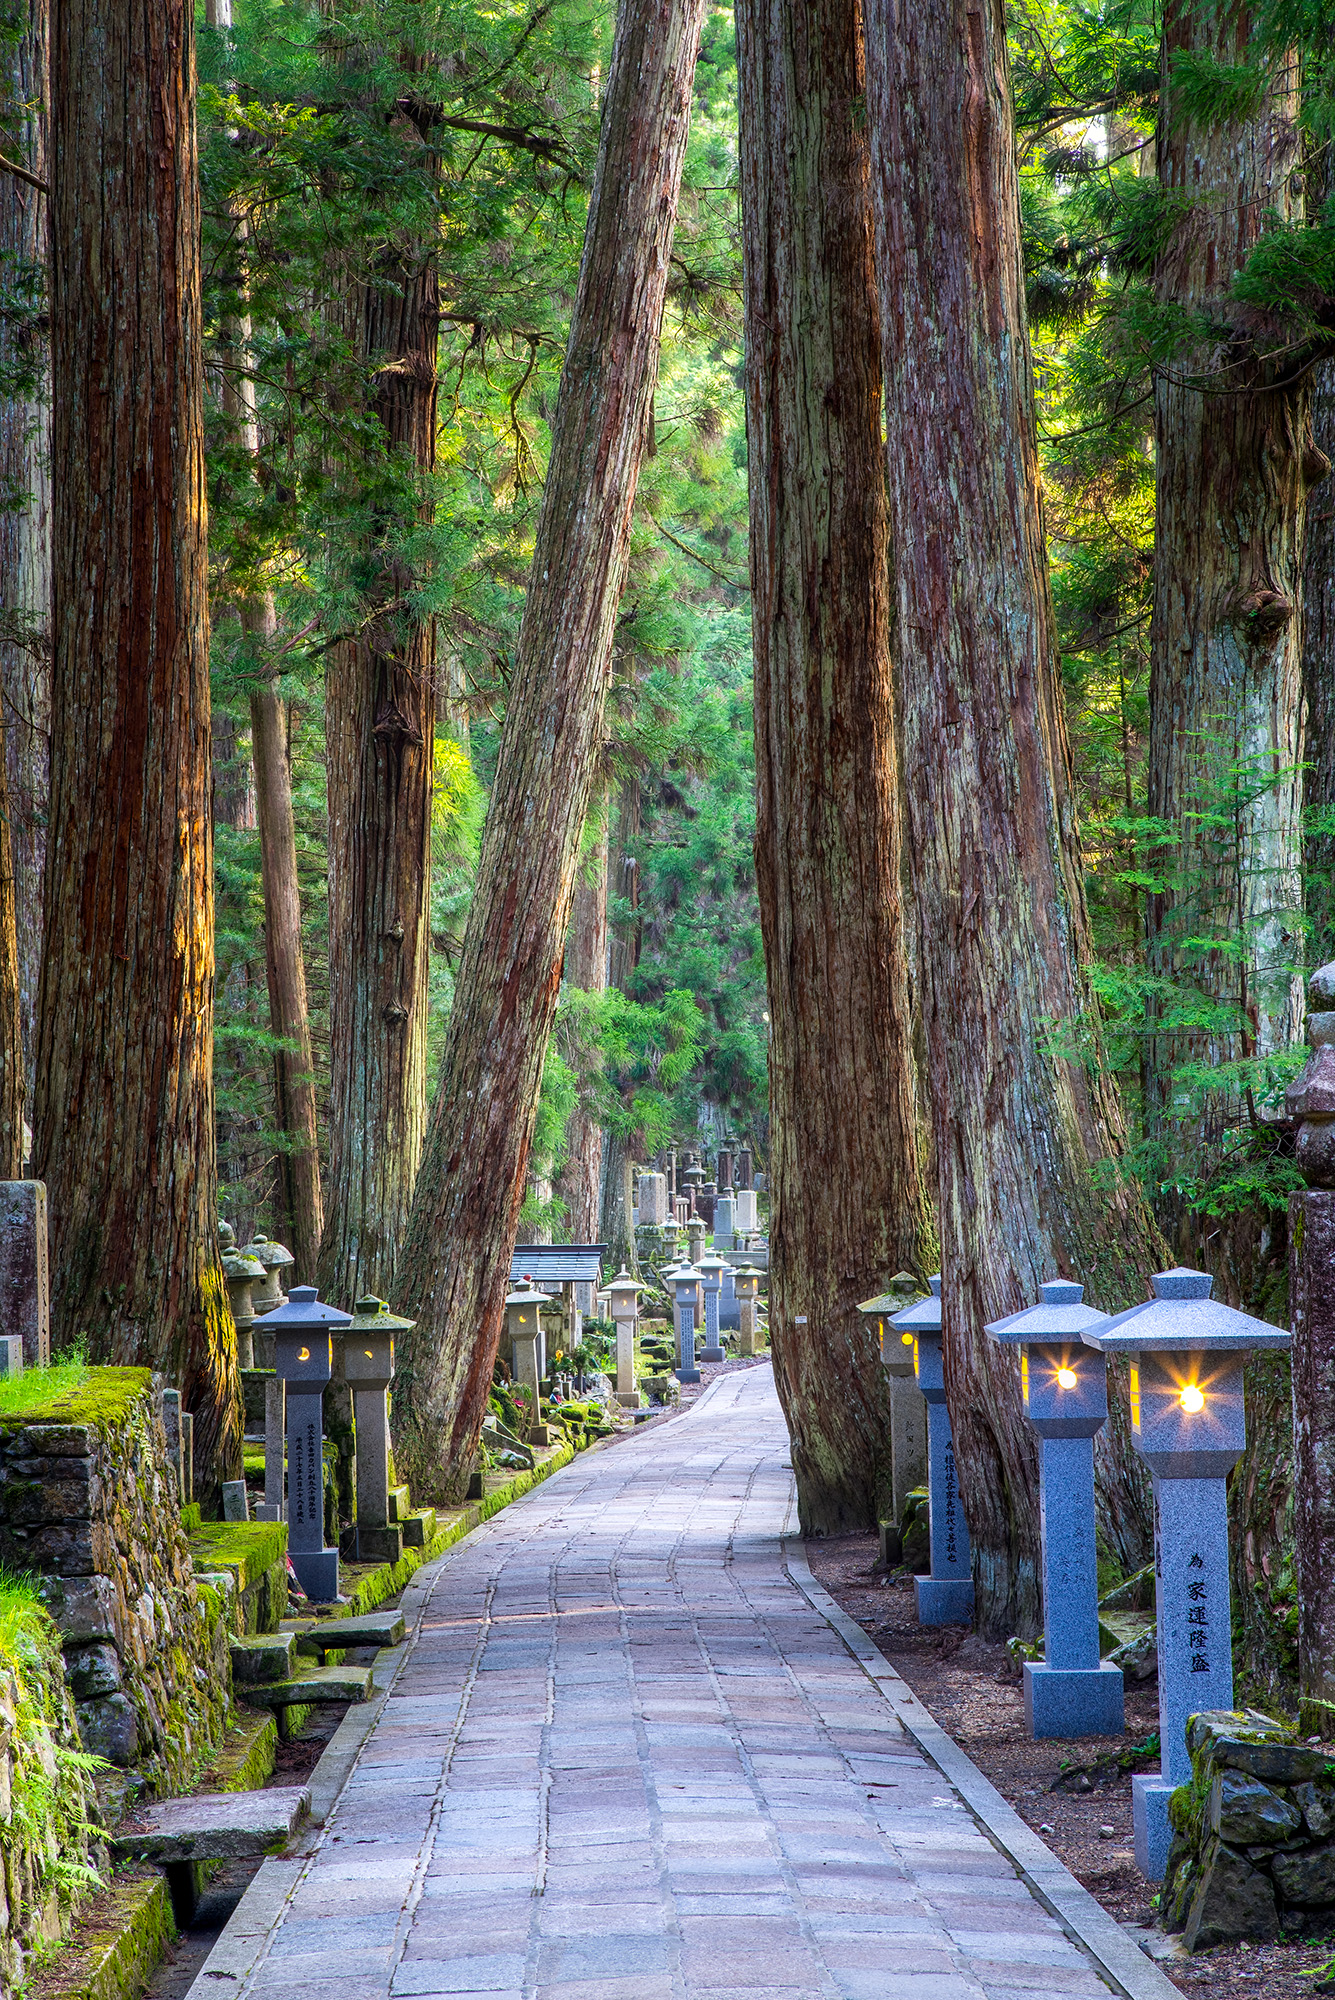 This vertical image transports you to the heart of Koyasan's sacred forest. Towering cedar trees form an impressive canopy as...